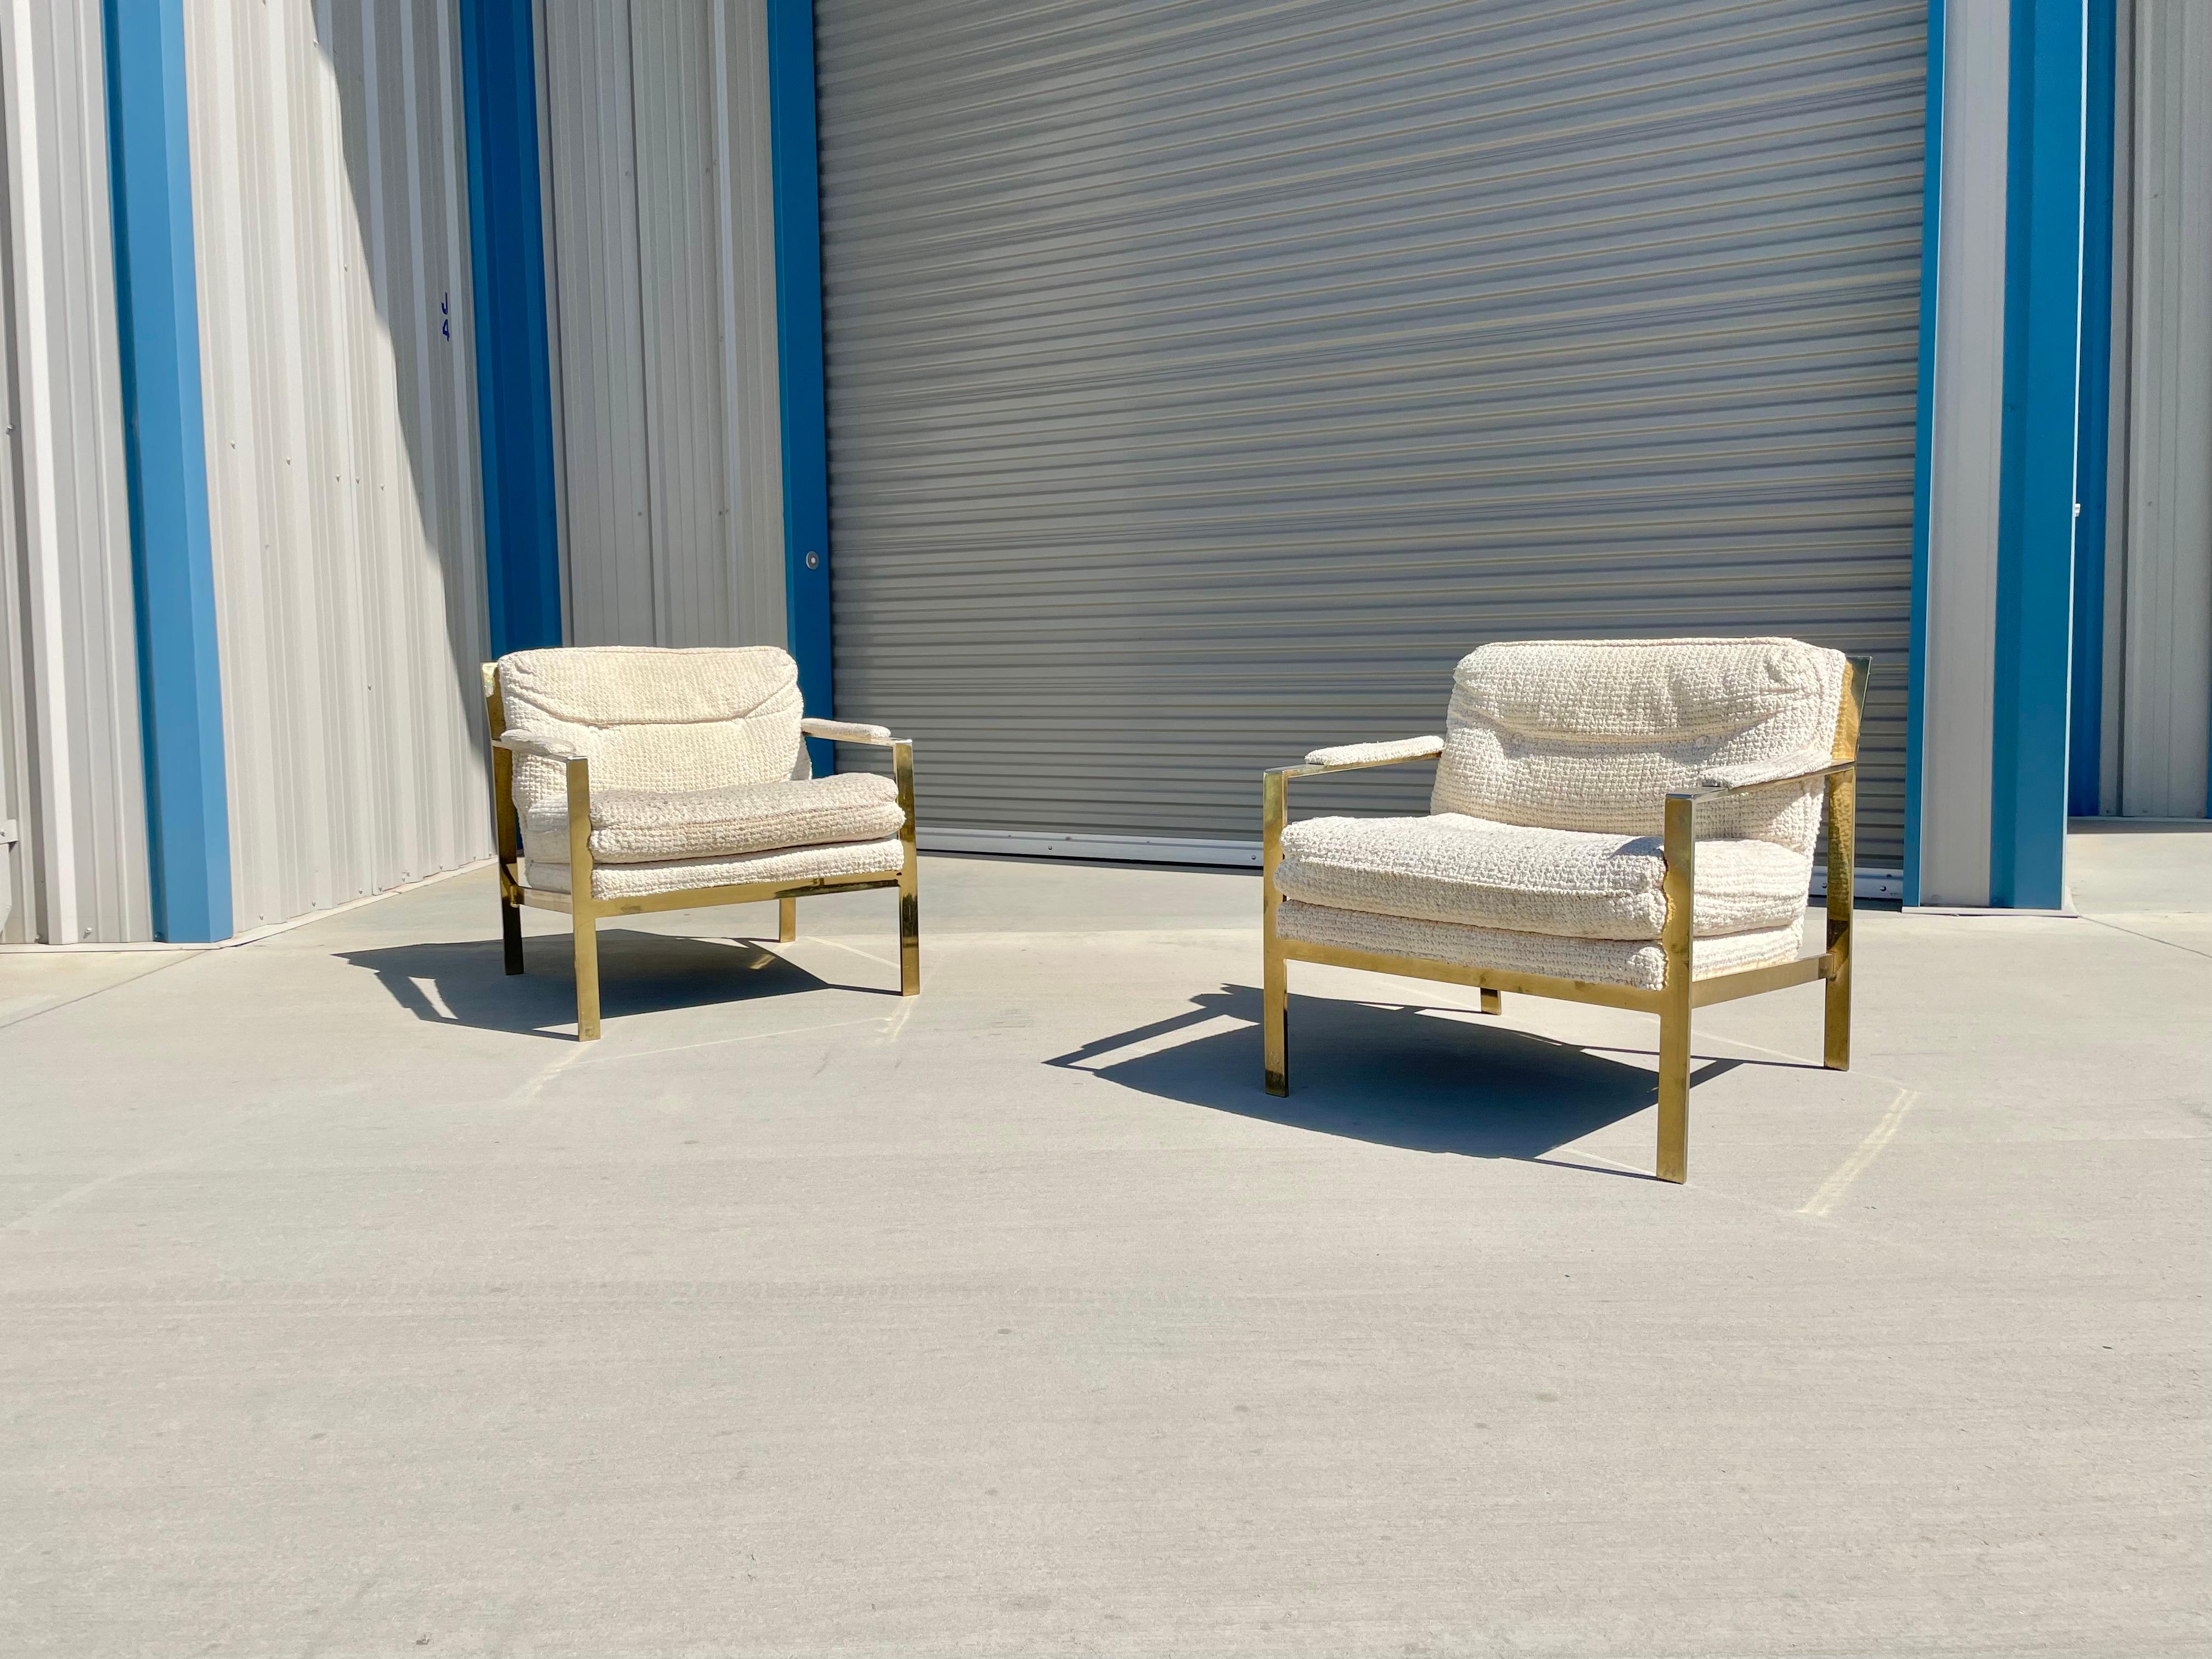 Mid-century brass lounge chairs styled after Milo Baughman was designed and manufactured in the united states circa 1970s. The chairs feature a fully brass frame that stands out for their elegant architecture and sleek design. These chairs are also